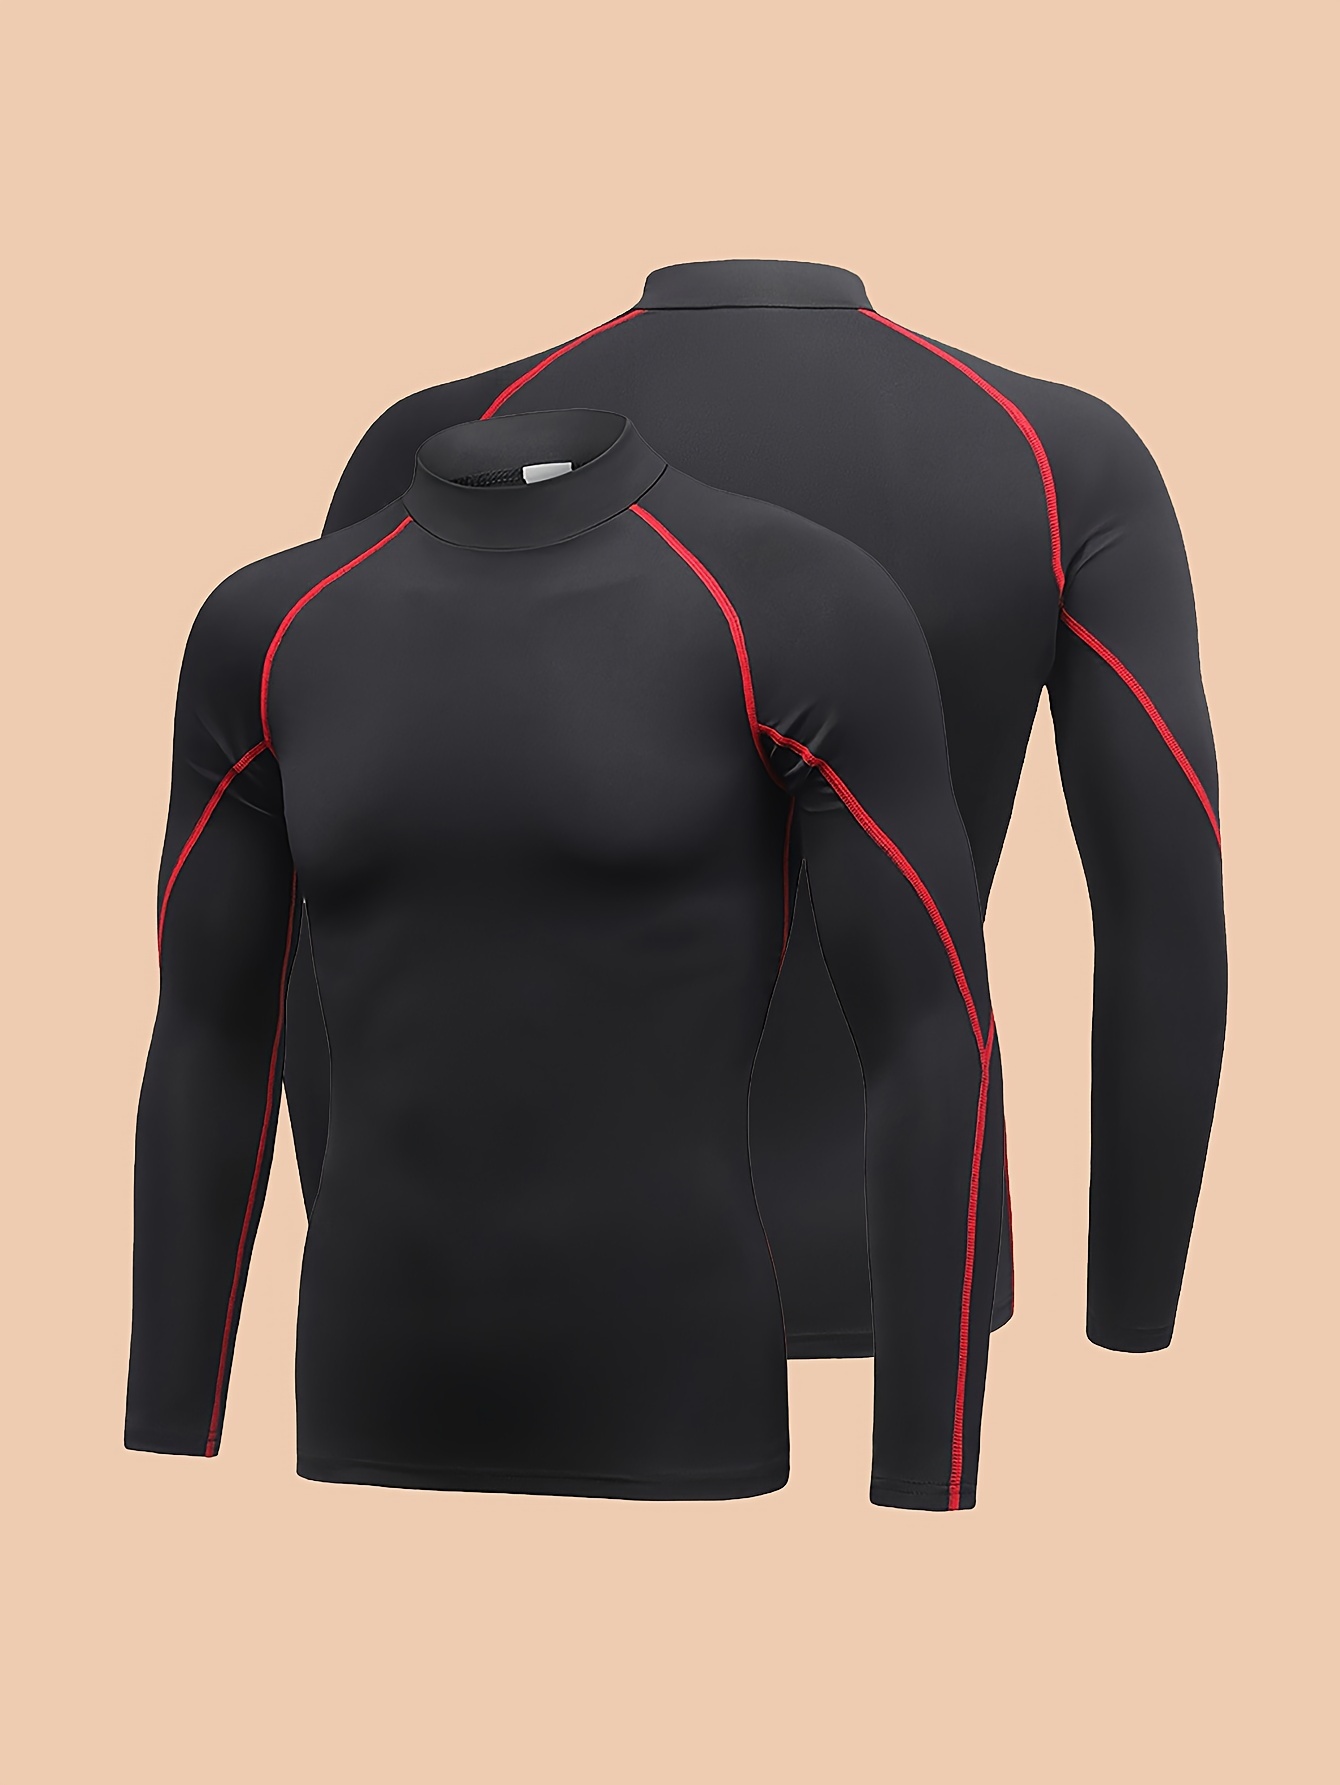 Mens Long Sleeve GYM Shirt Fast Dry Sport Tight Fit Cycling Compression  T-Shirt